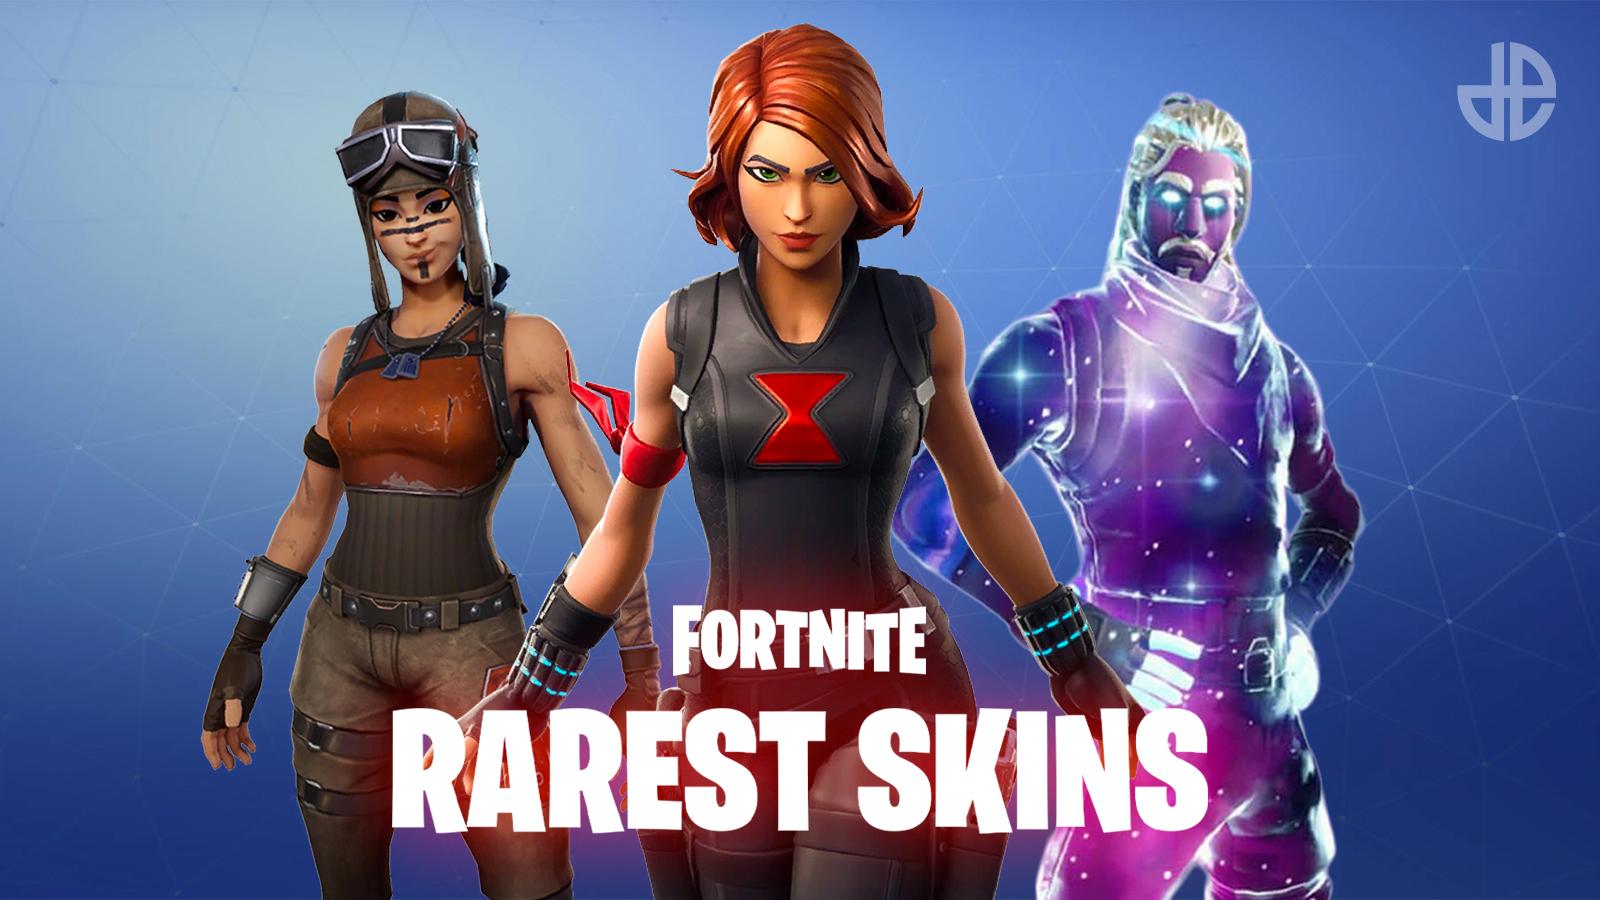 Some of the rarest skins in Fortnite